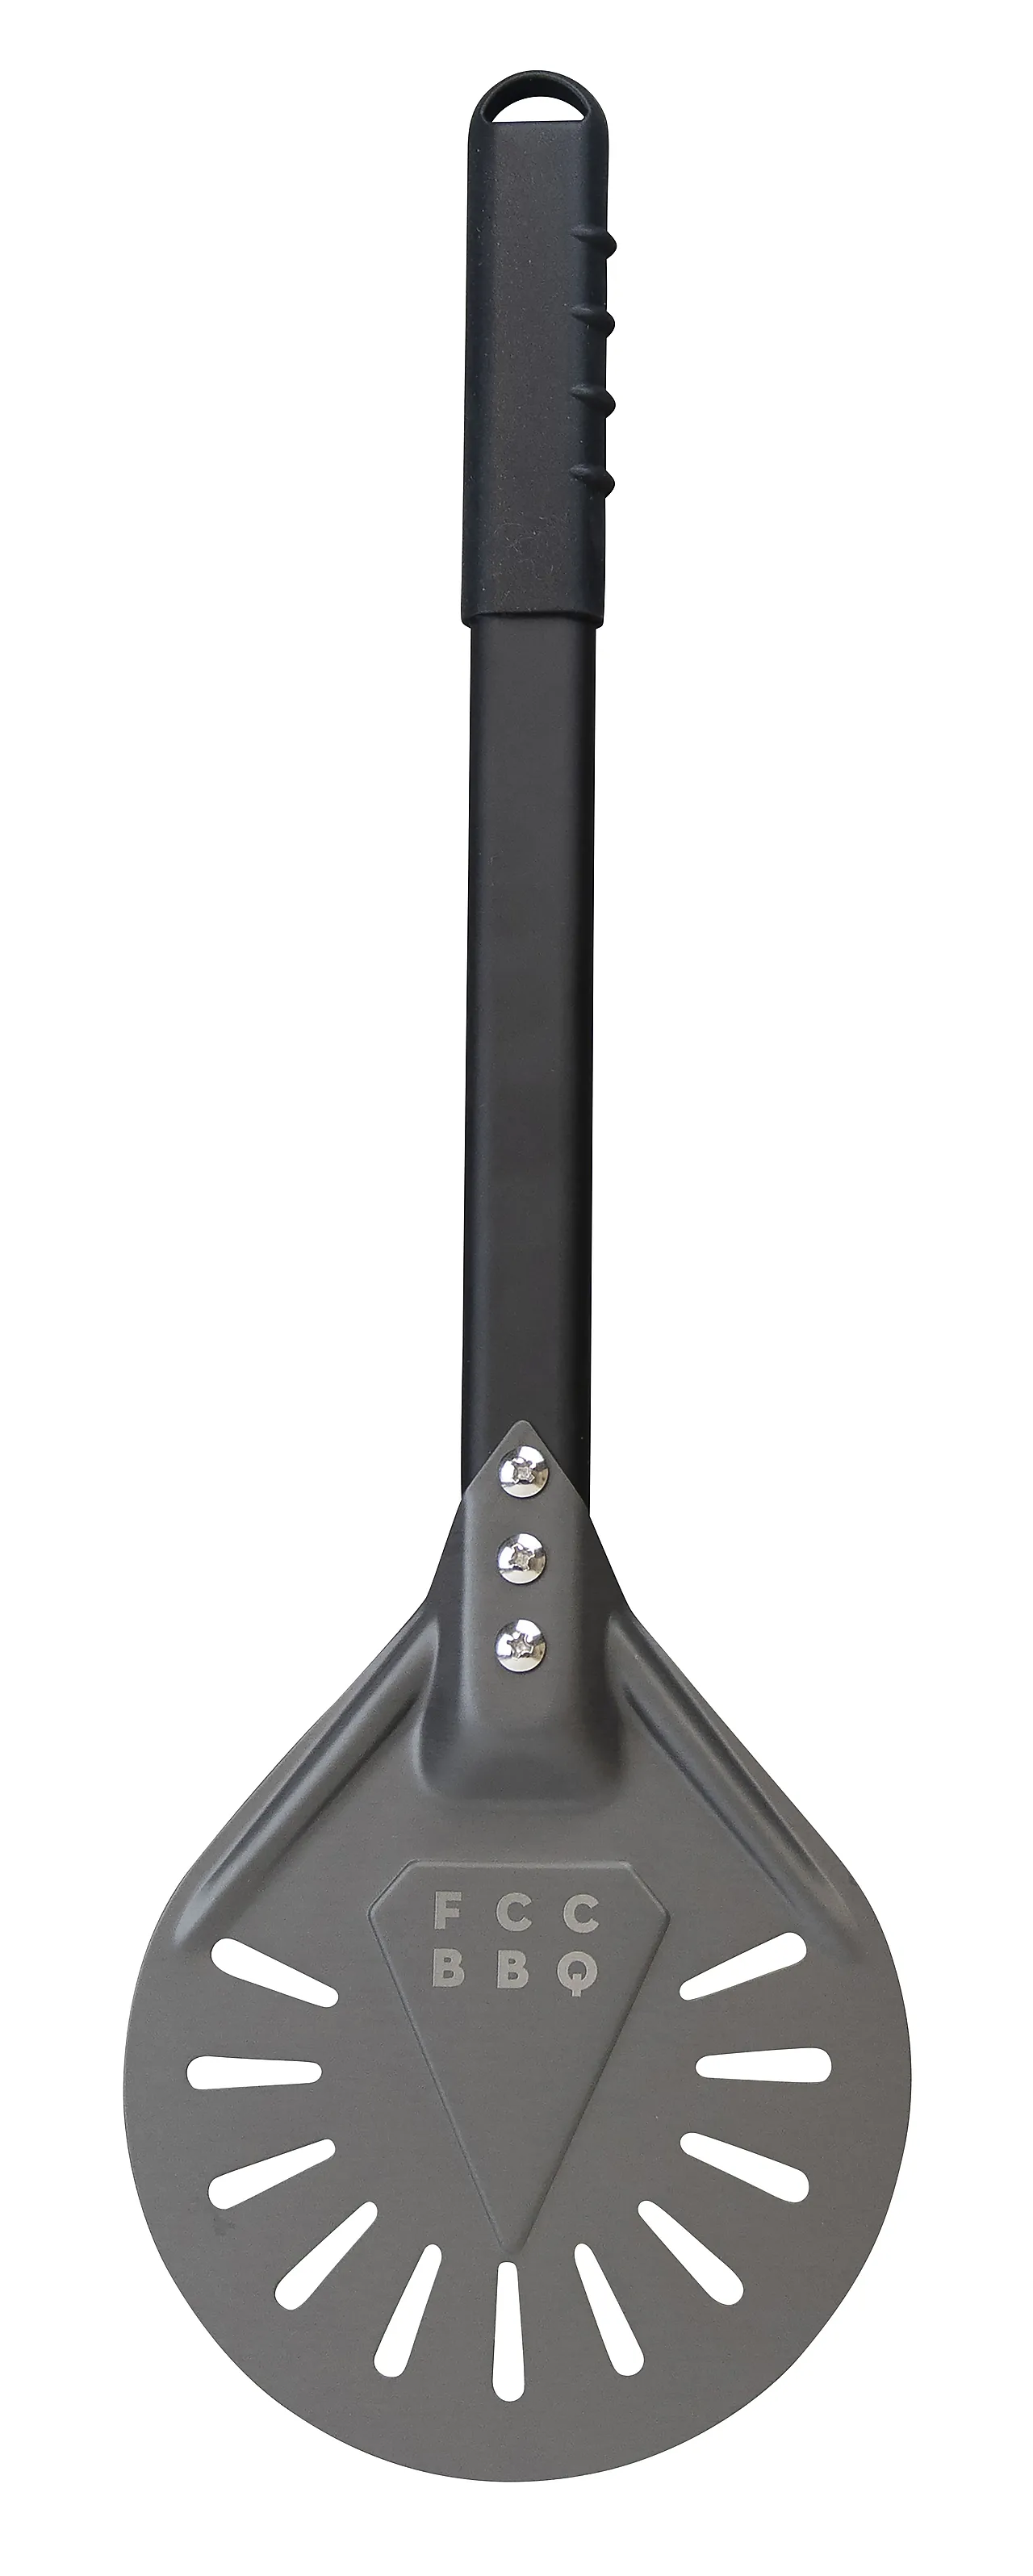 Roteringsspade BBQ for pizza null - null - 3 - Miniatyr